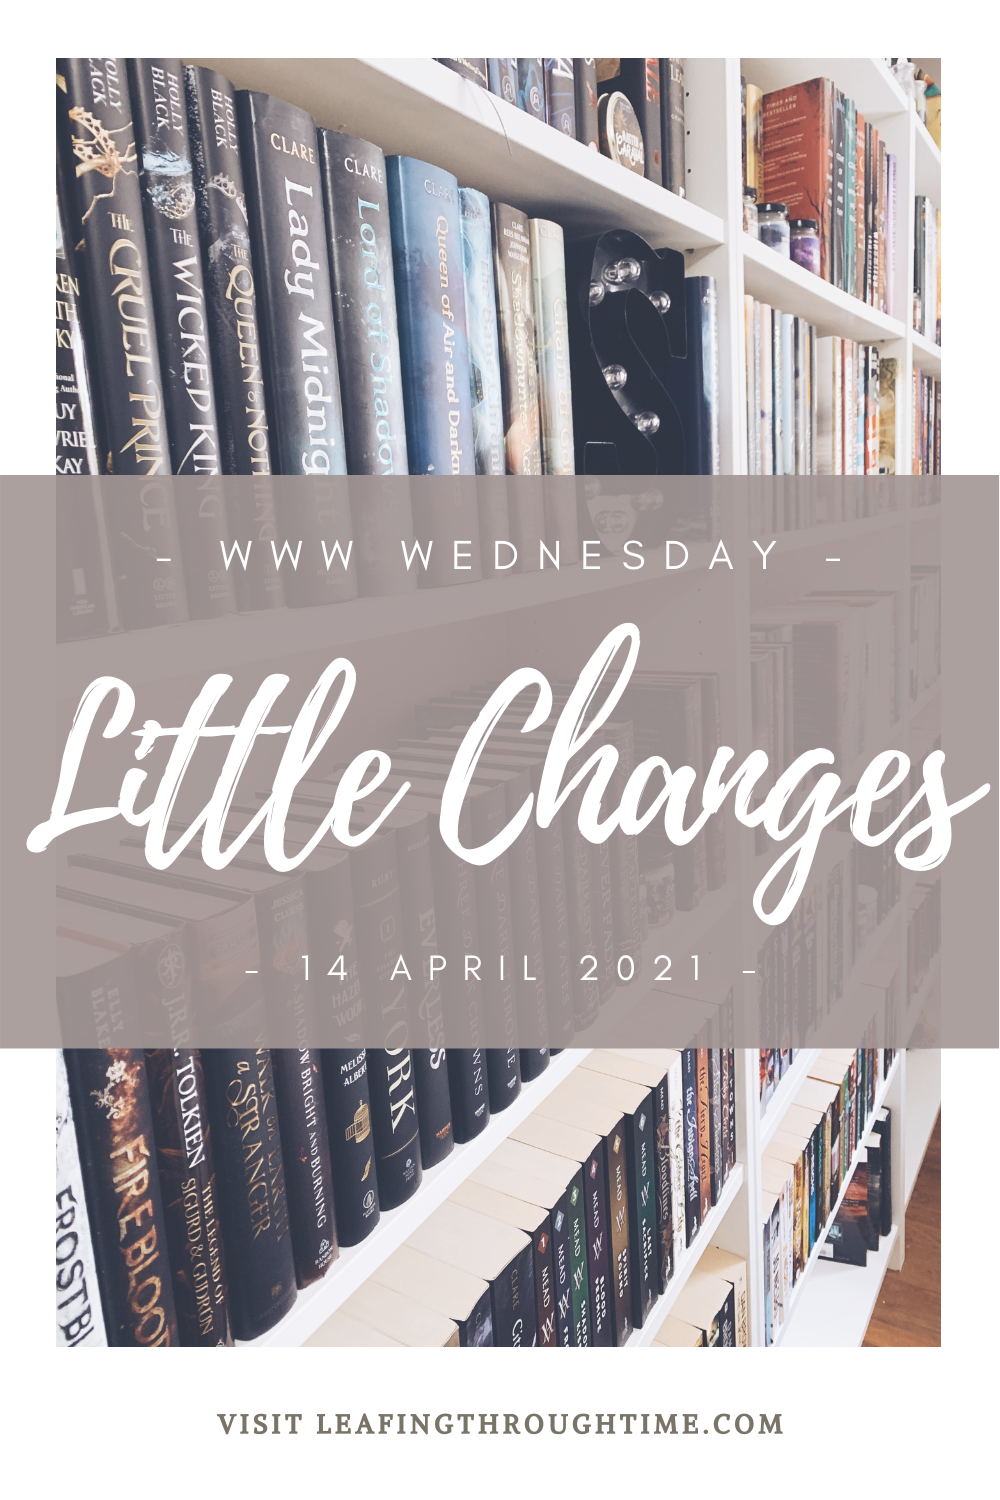 WWW Wednesday – Little Changes